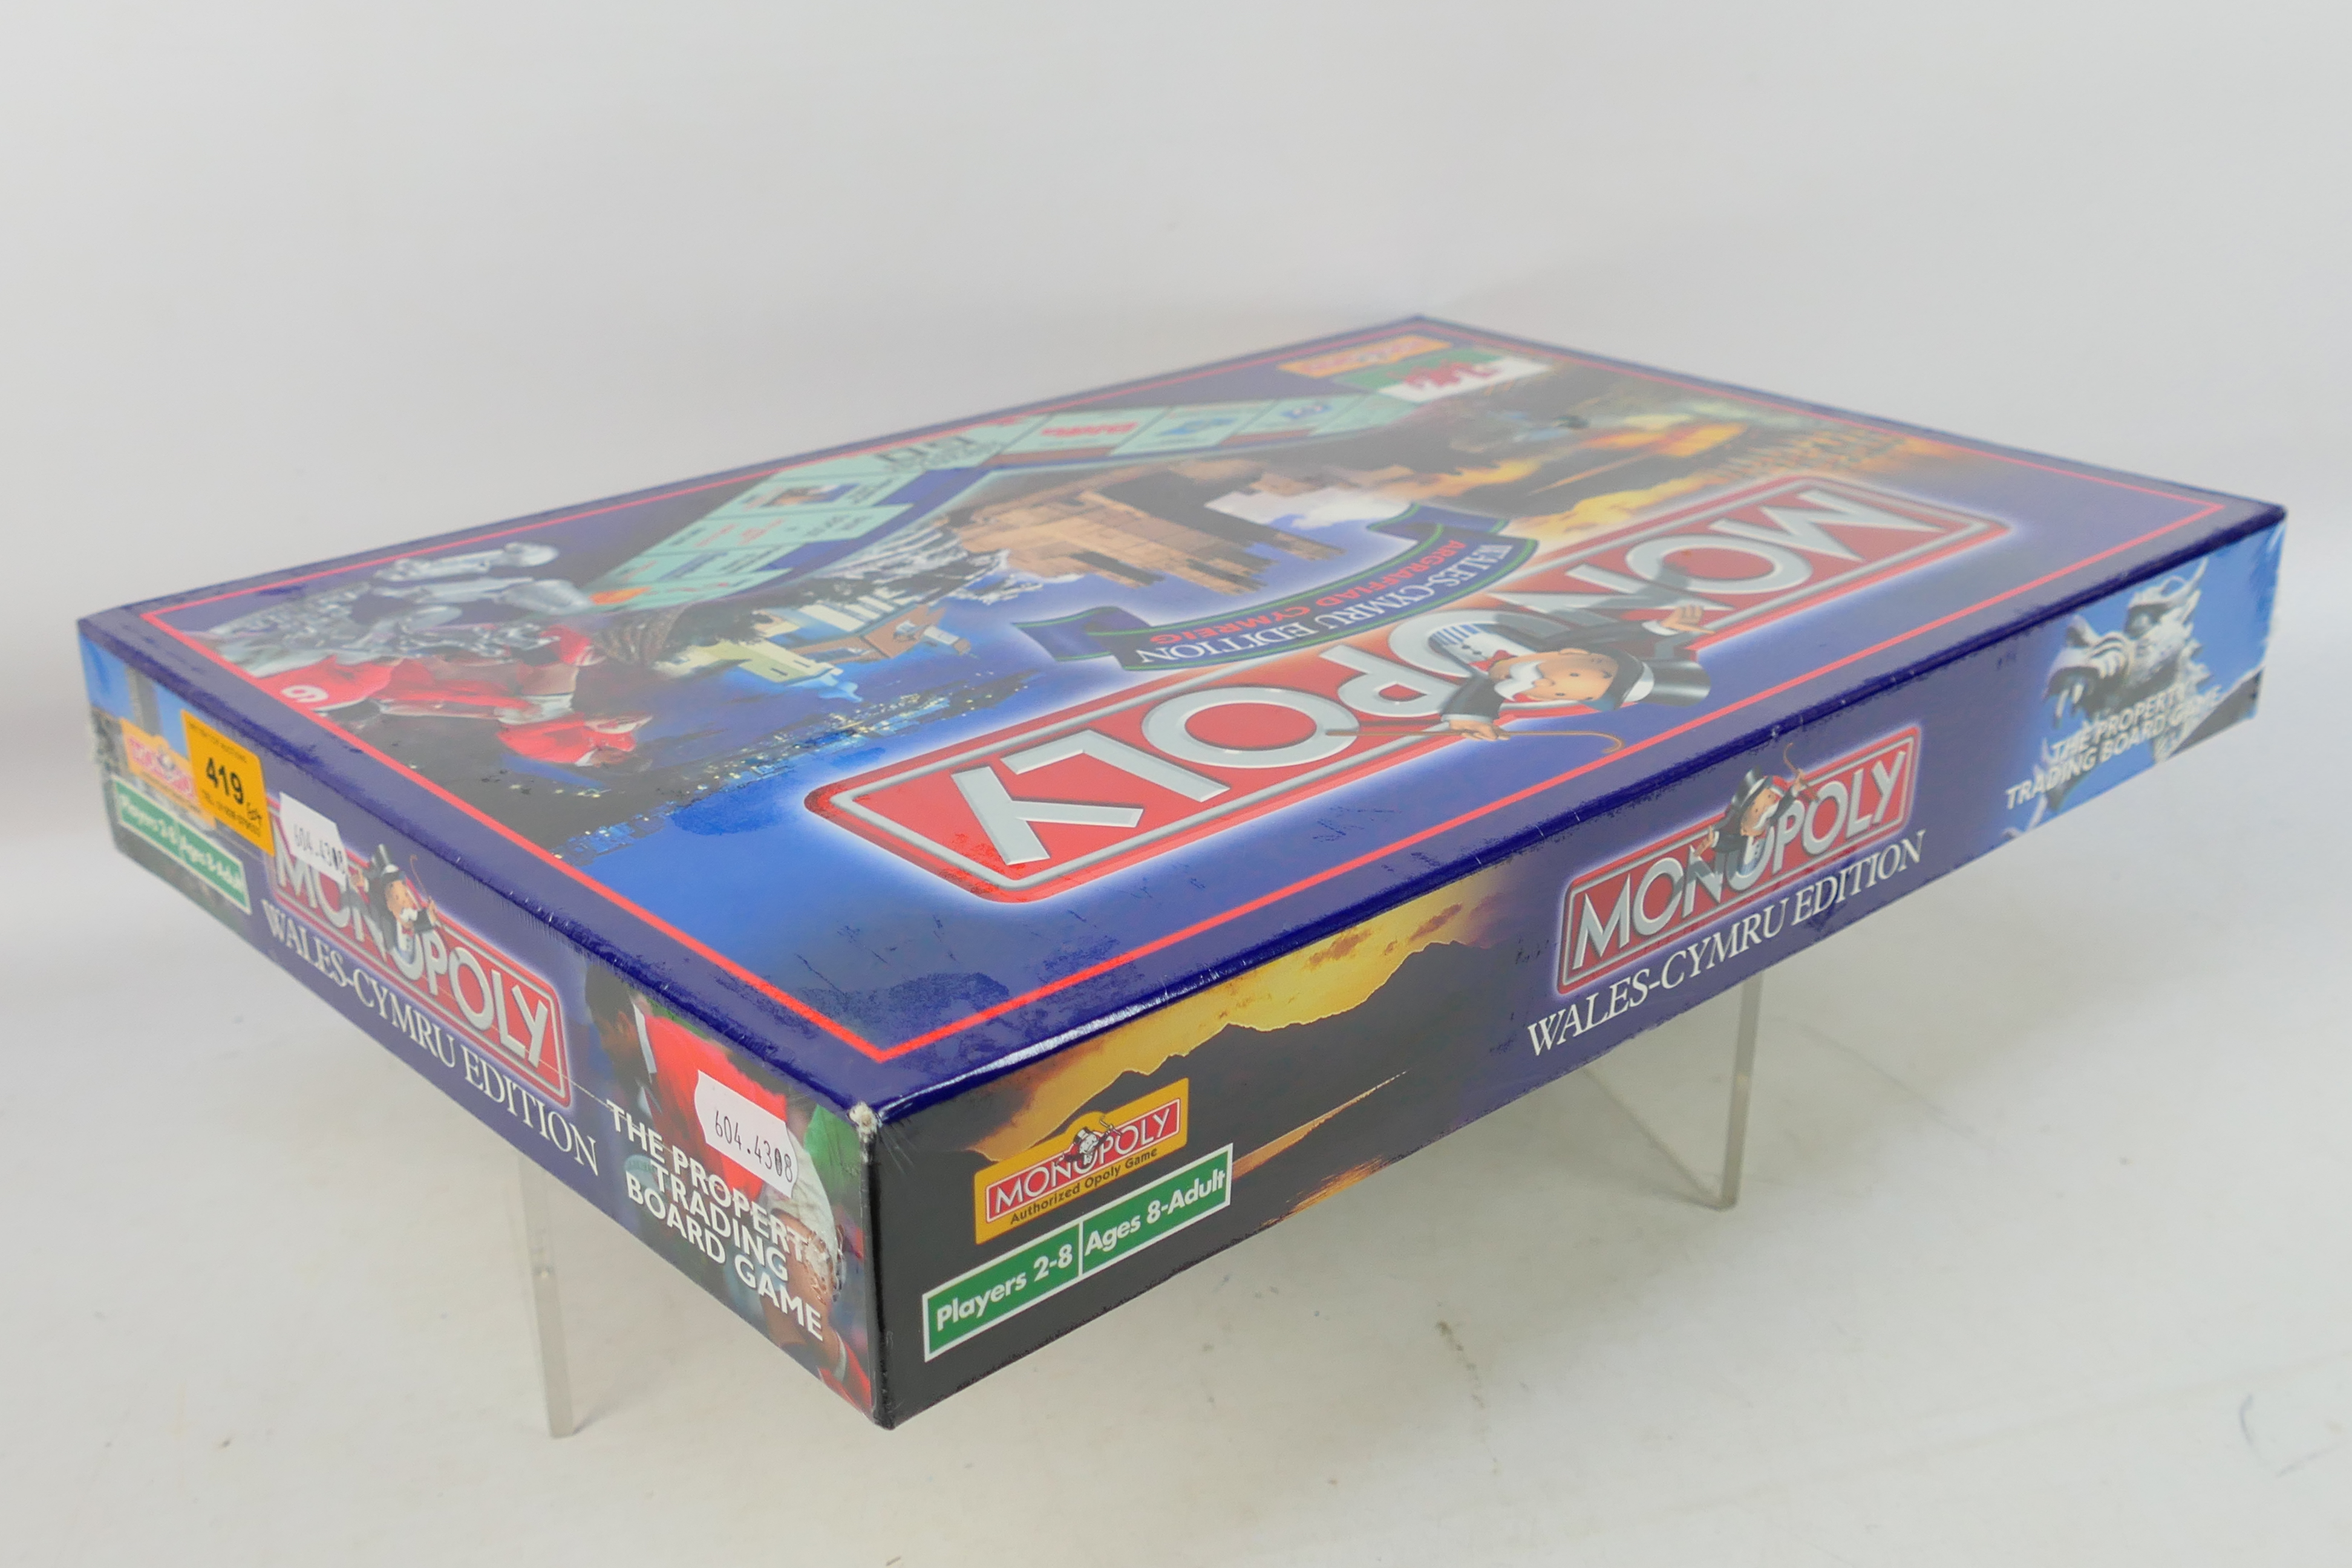 Hasbro - Monopoly - An unopened Wales-Cy - Image 3 of 3